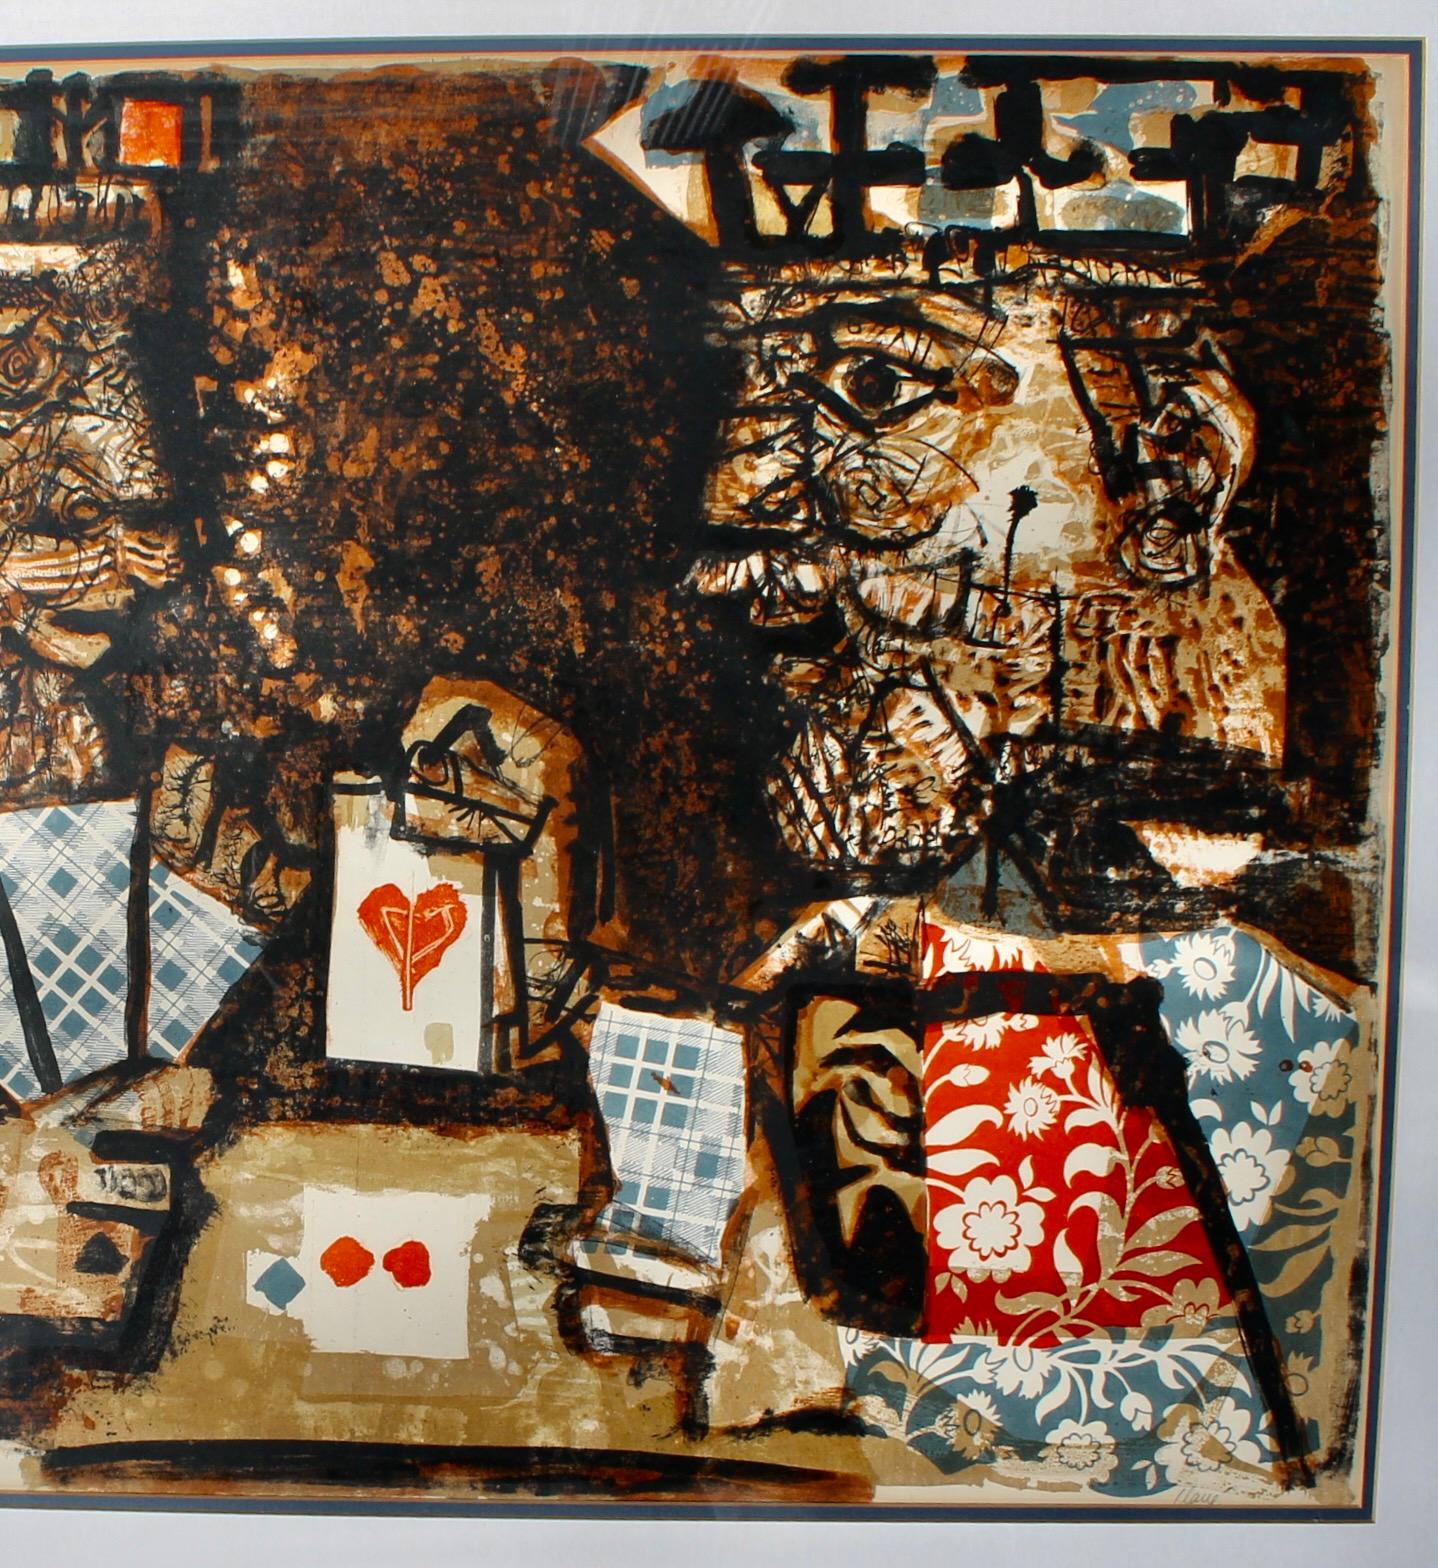 Antoni Clave (1913-2005) „The Game of Cards“ Lithographie 1956 im Angebot 2